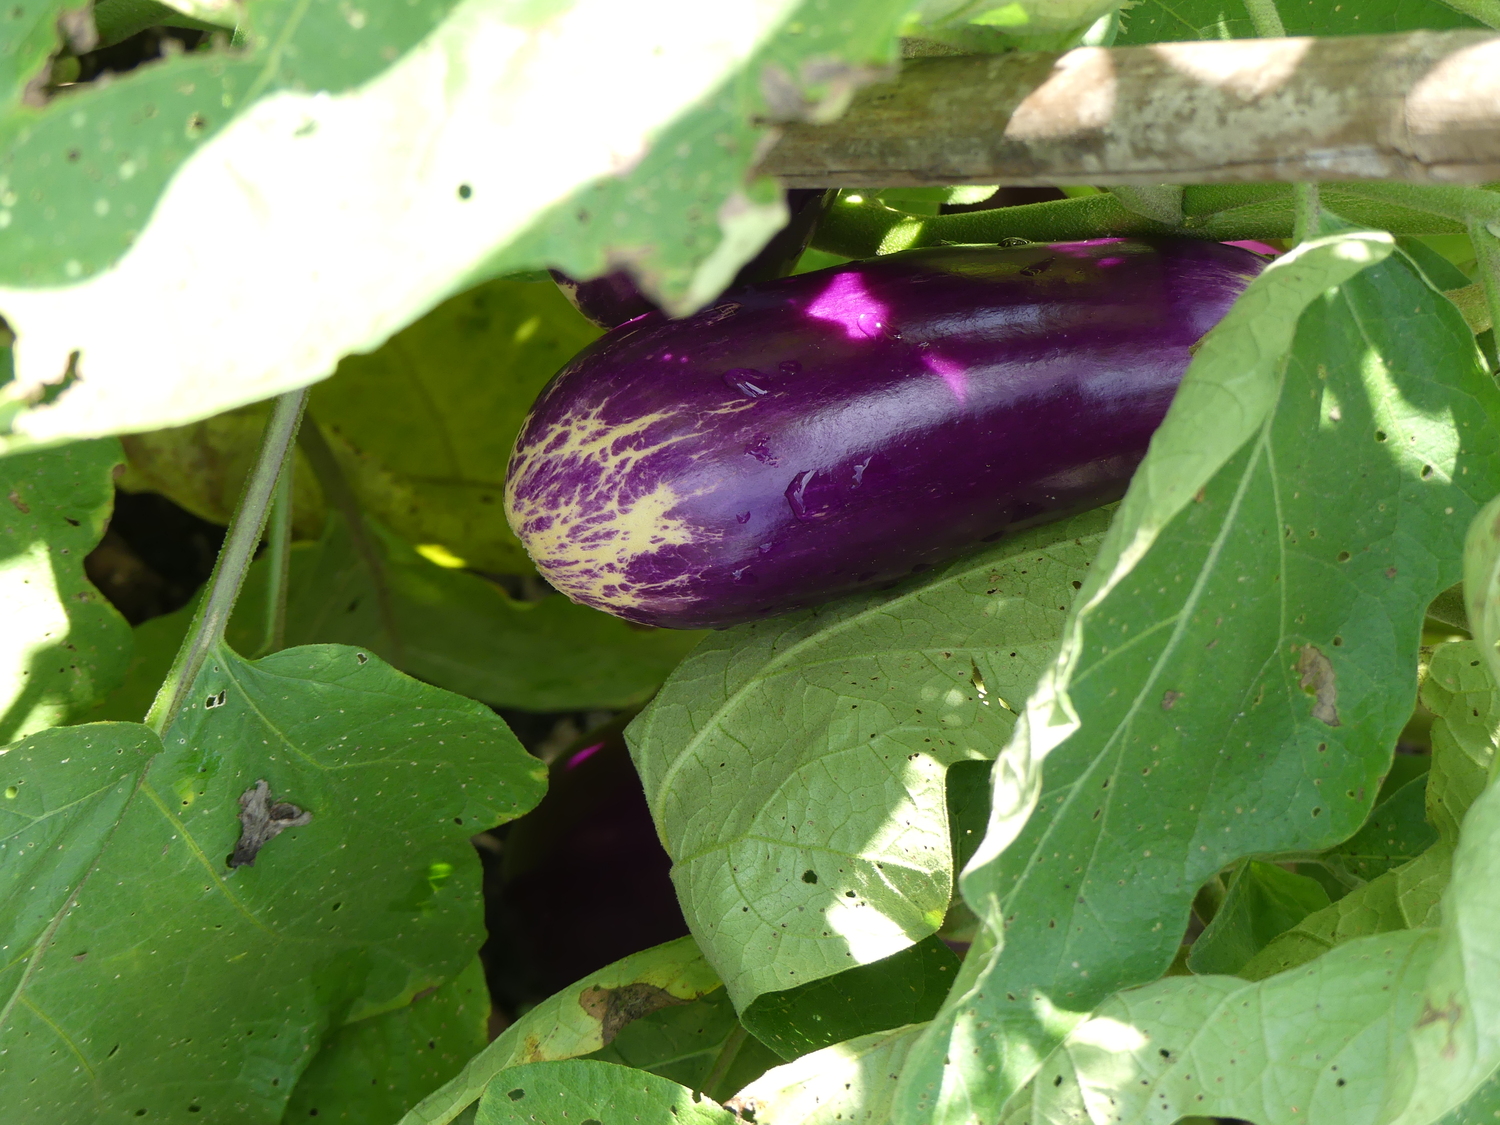 An overripe eggplant is showing signs of cracking at the blossom end. For prime taste, harvest eggplants at maturity based on looks and days from transplanting. The smaller holes on the leaves below the fruit are from flea beetle feeding. ANDREW MESSINGER